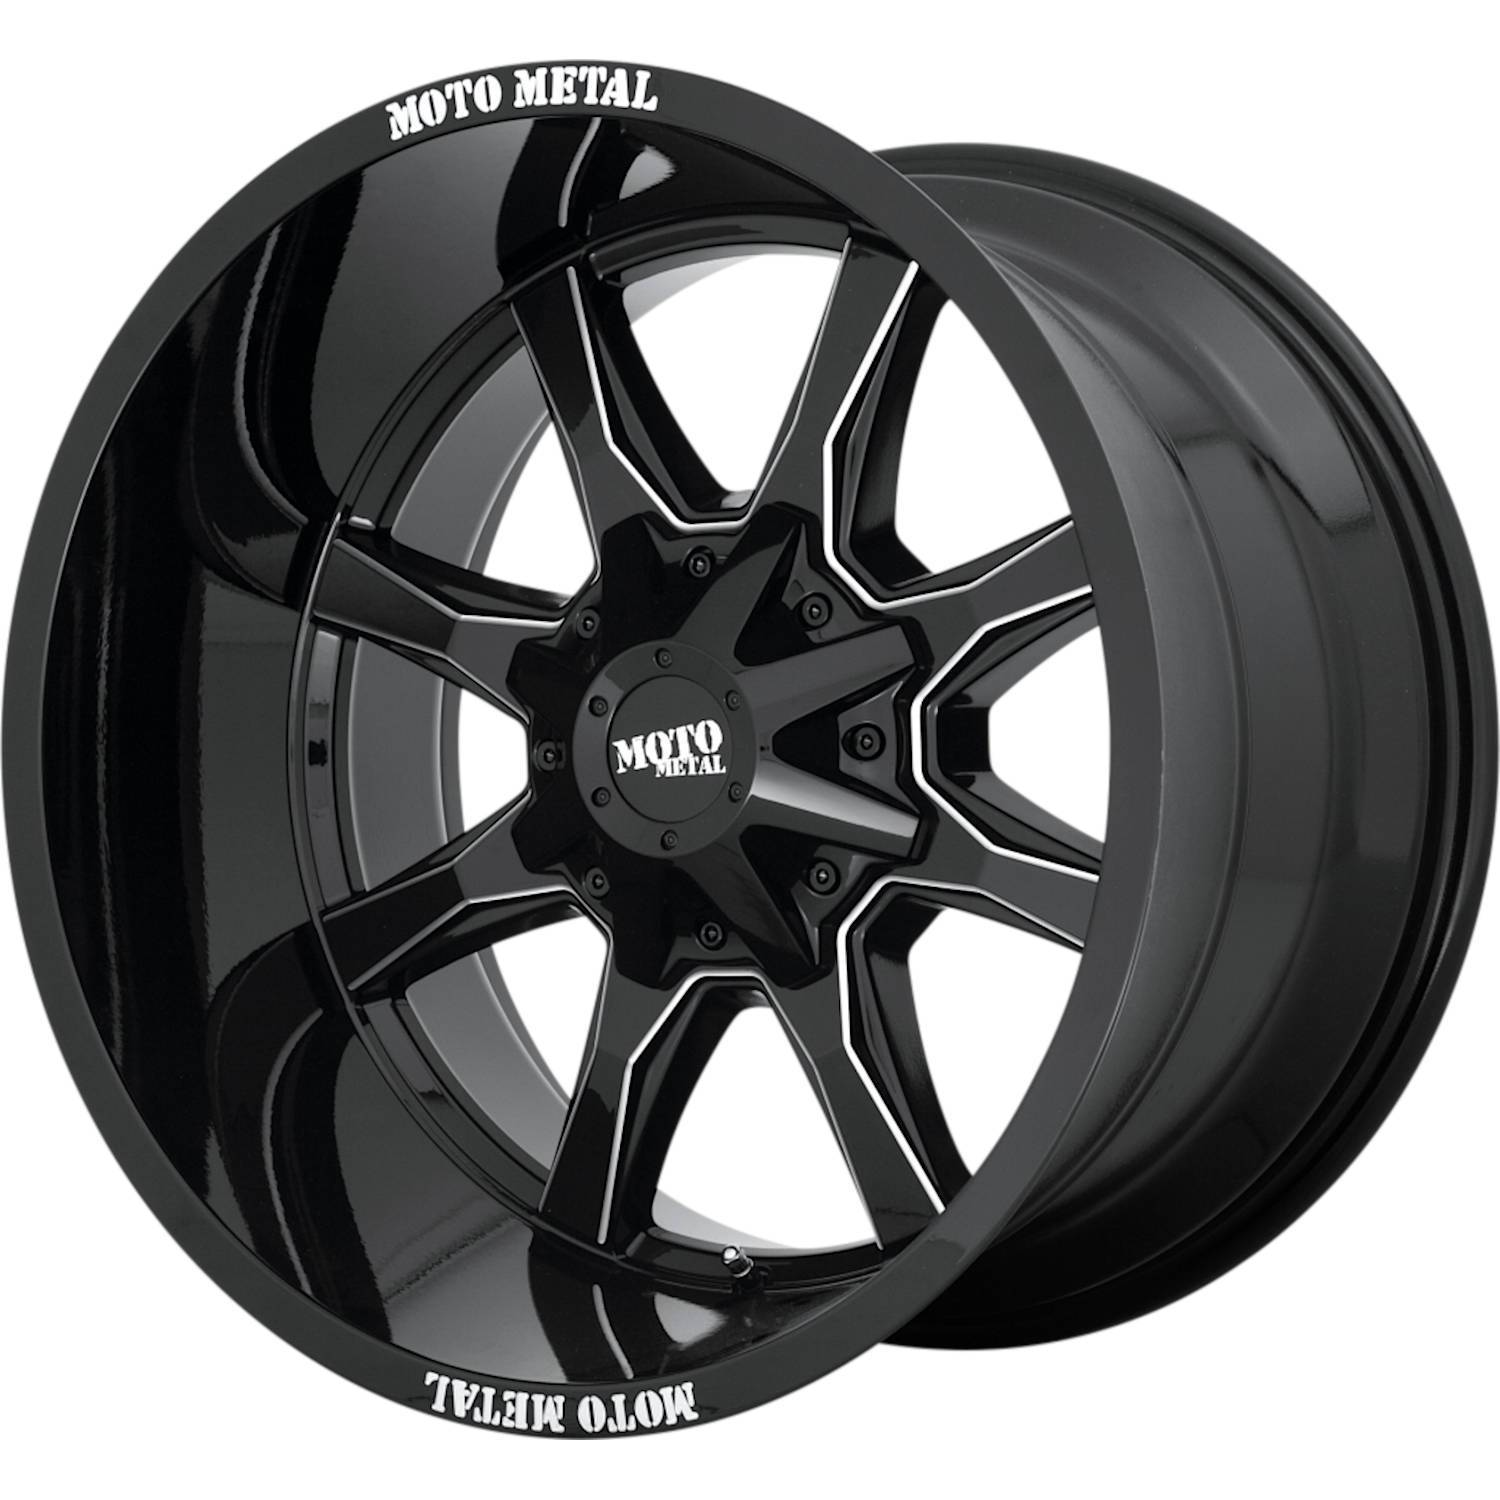 Moto Metal MO970 20x9 18 6x135/6x139.7 (6x5.5) Gloss Black with Milled Spoke Edges - Tires and Engine Performance